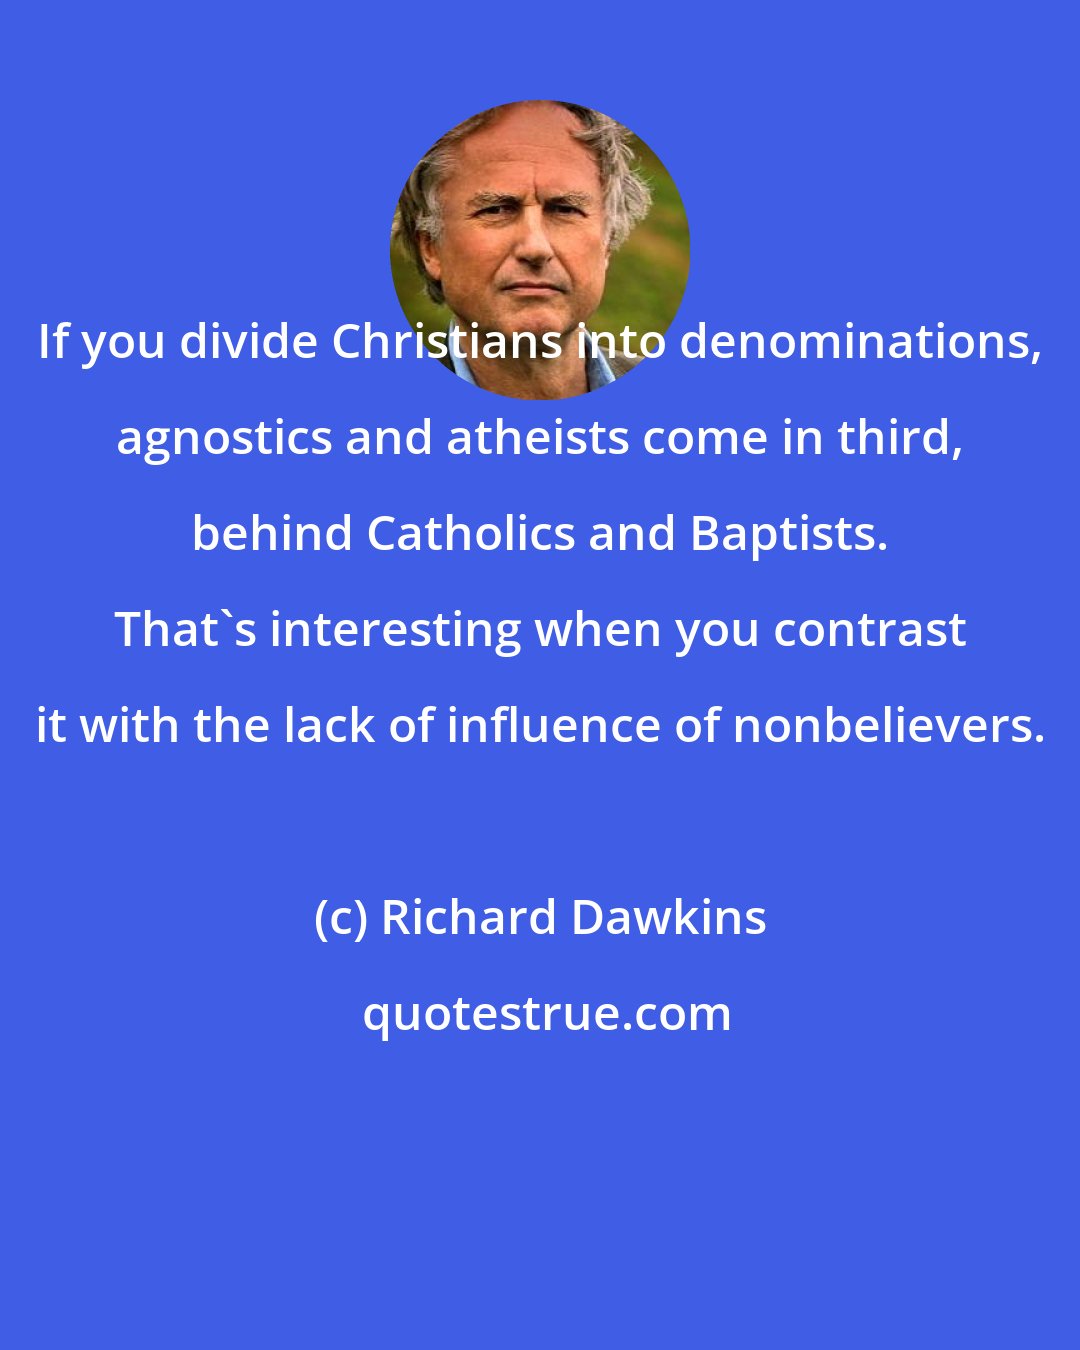 Richard Dawkins: If you divide Christians into denominations, agnostics and atheists come in third, behind Catholics and Baptists. That's interesting when you contrast it with the lack of influence of nonbelievers.